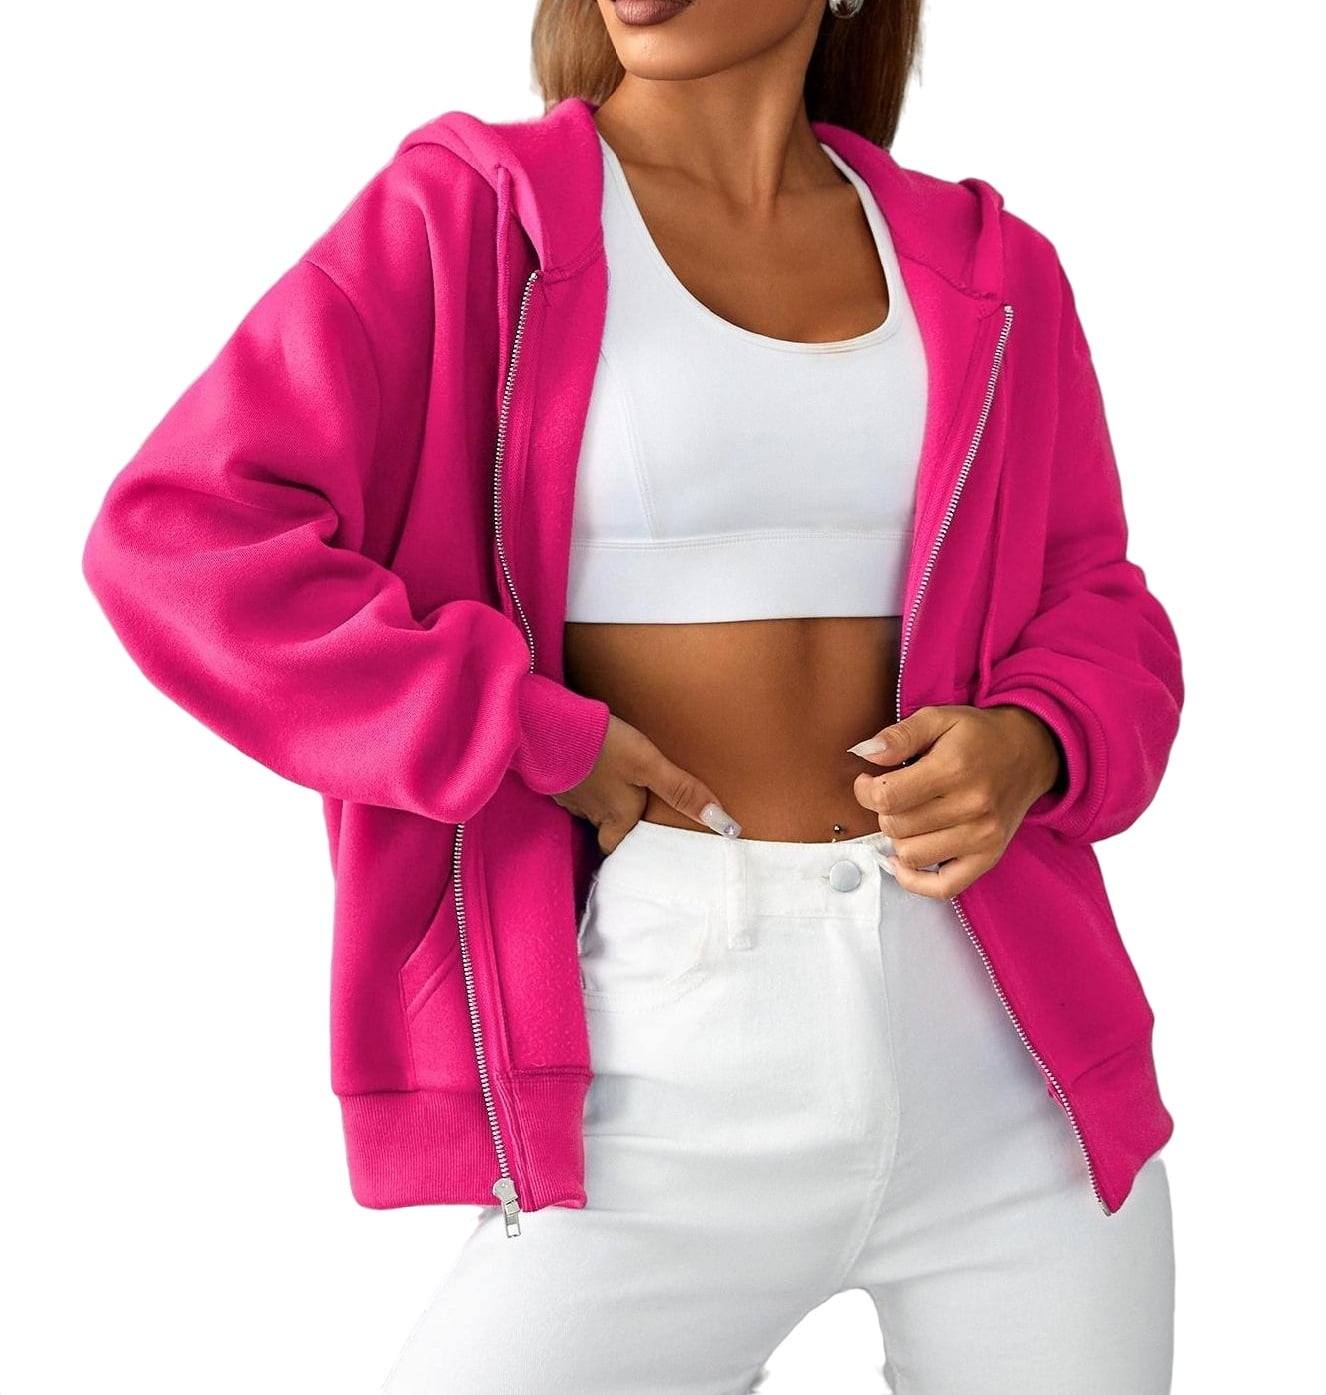  HUMMHUANJ Hoodies For Women 2 Piece Outfits,polo  sweater,rewards points balance in my account,cute stuff under 1 dollar,hot  pink shirt,festival clothes for women,casual outfits for women : Clothing,  Shoes & Jewelry